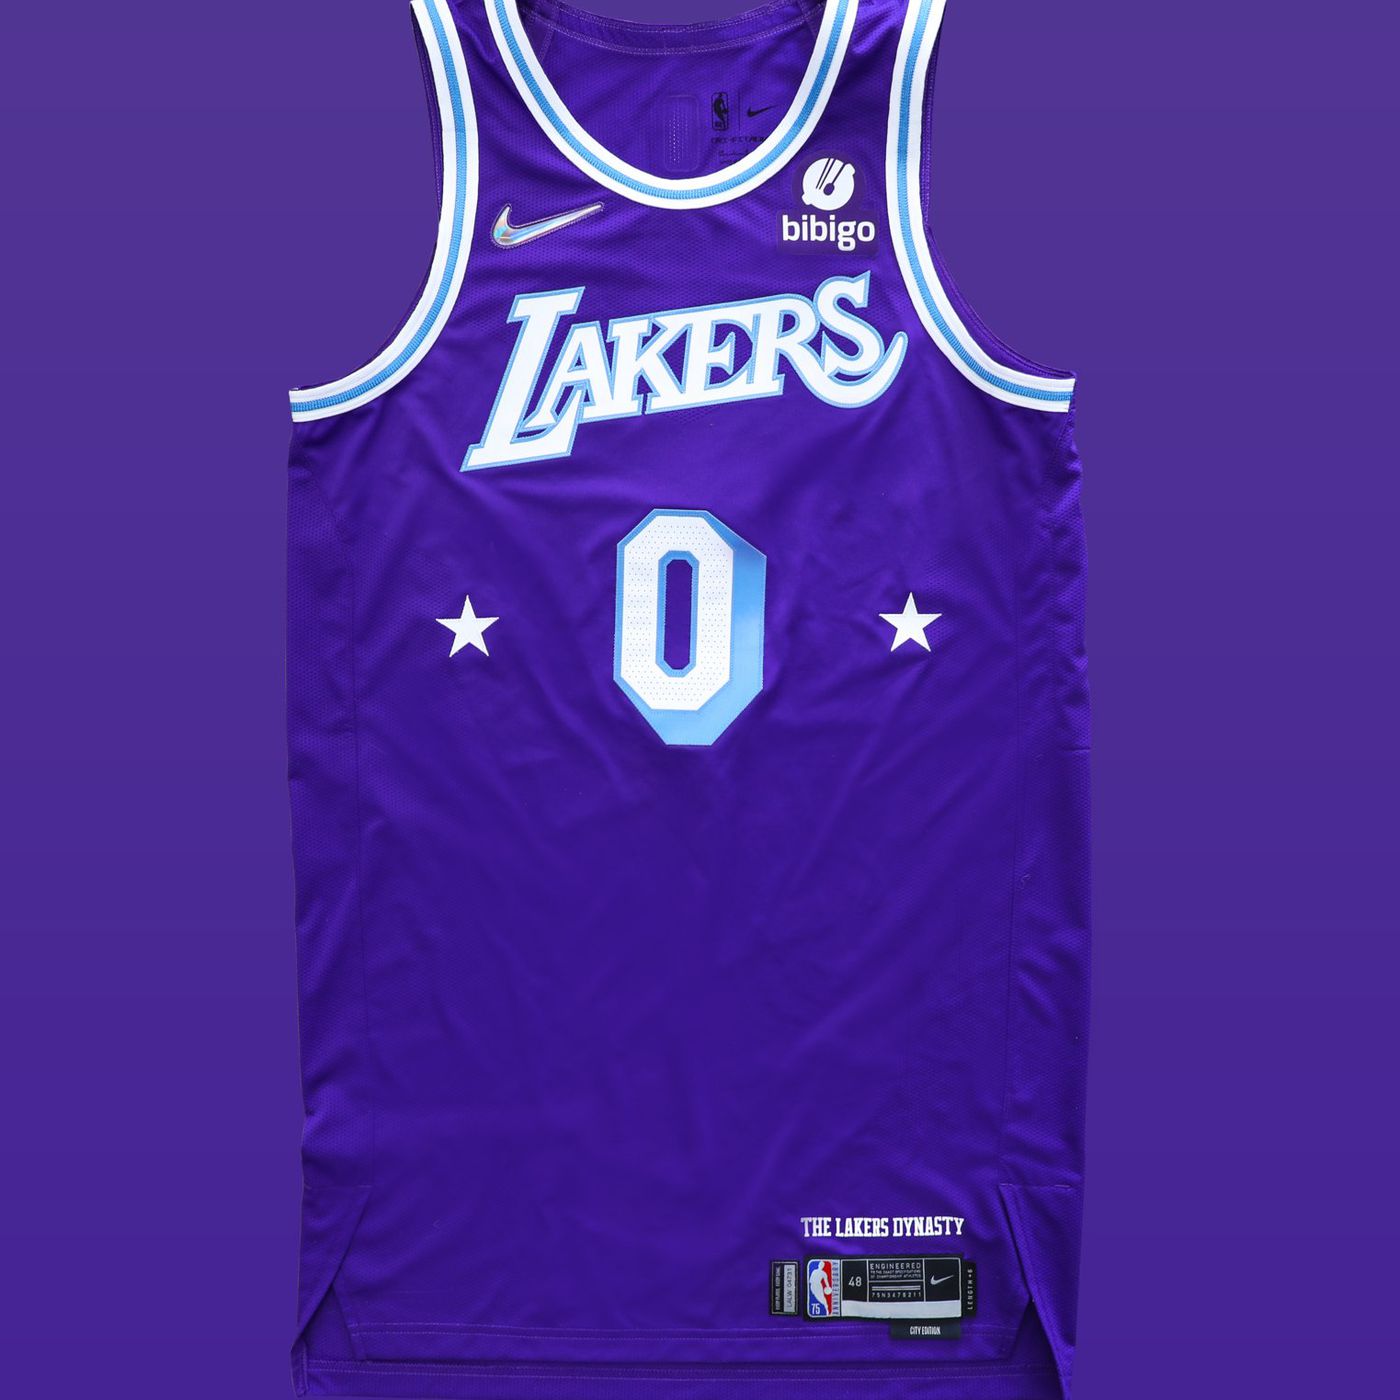 Lakers unveil awesome City Edition jerseys for NBA's 75th anniversary -  Silver Screen and Roll